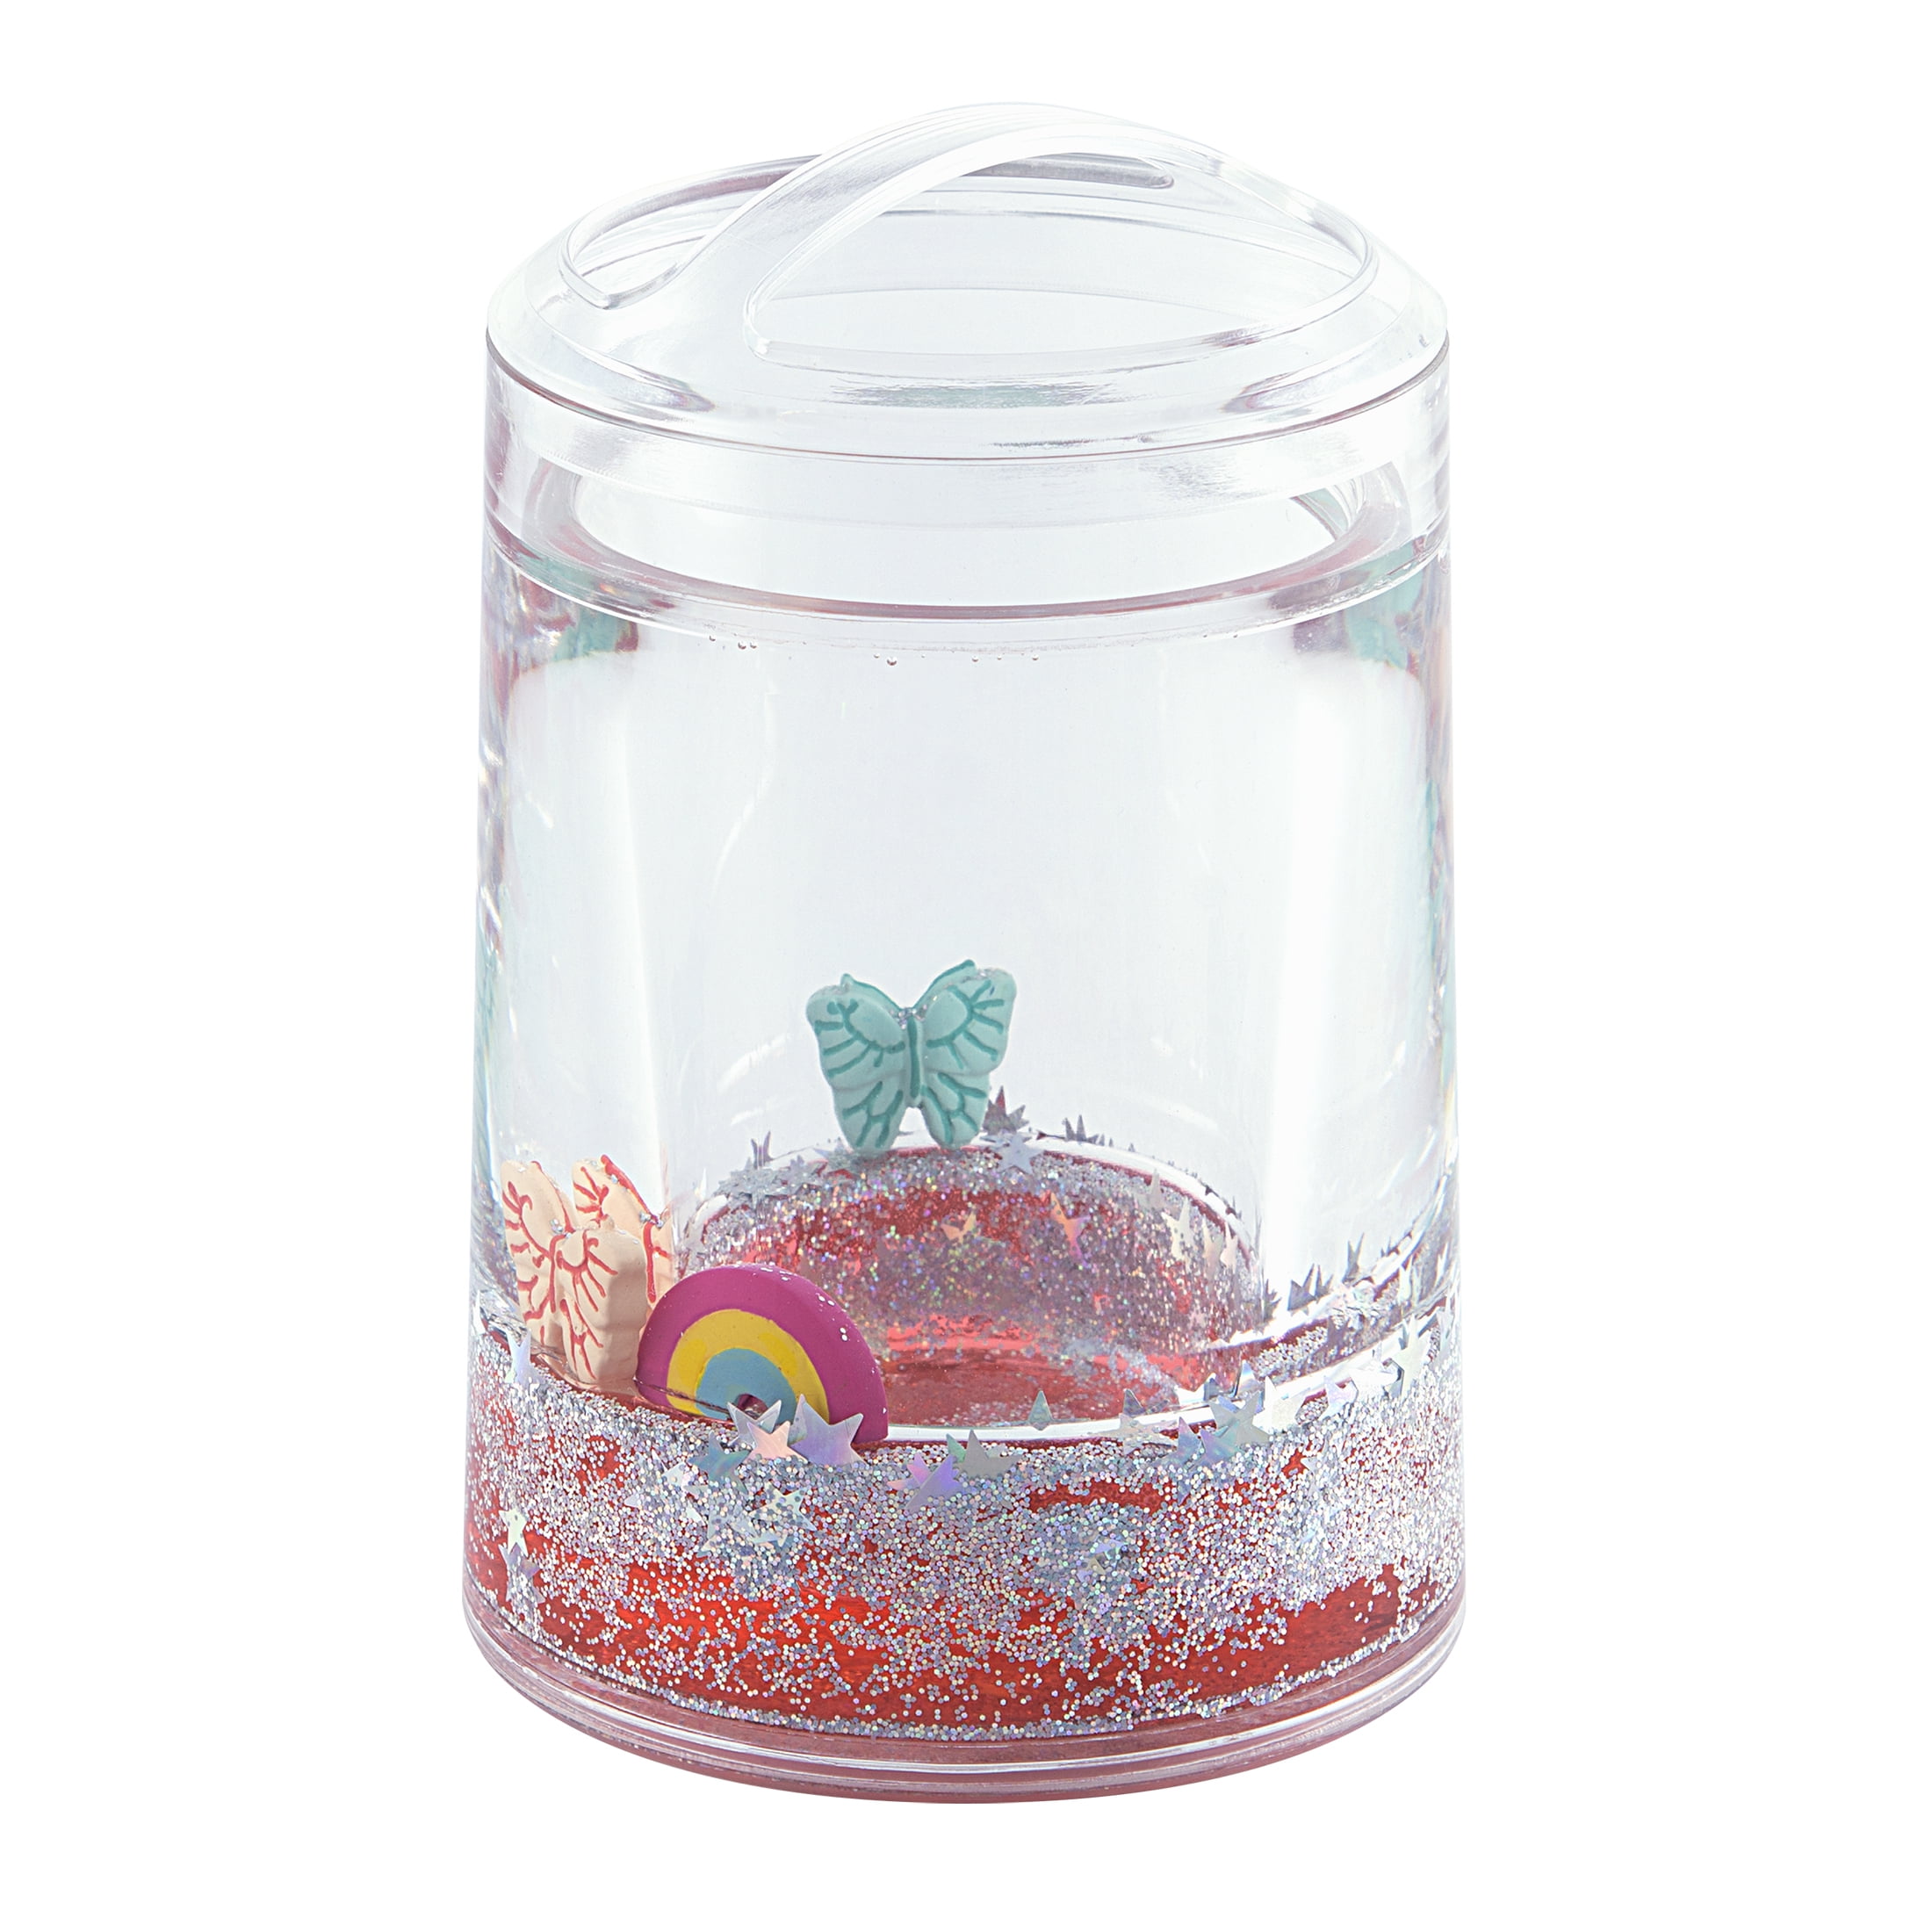 Rainbow Clear Plastic Floatie Toothbrush Holder with Glitter by Your Zone, Multi